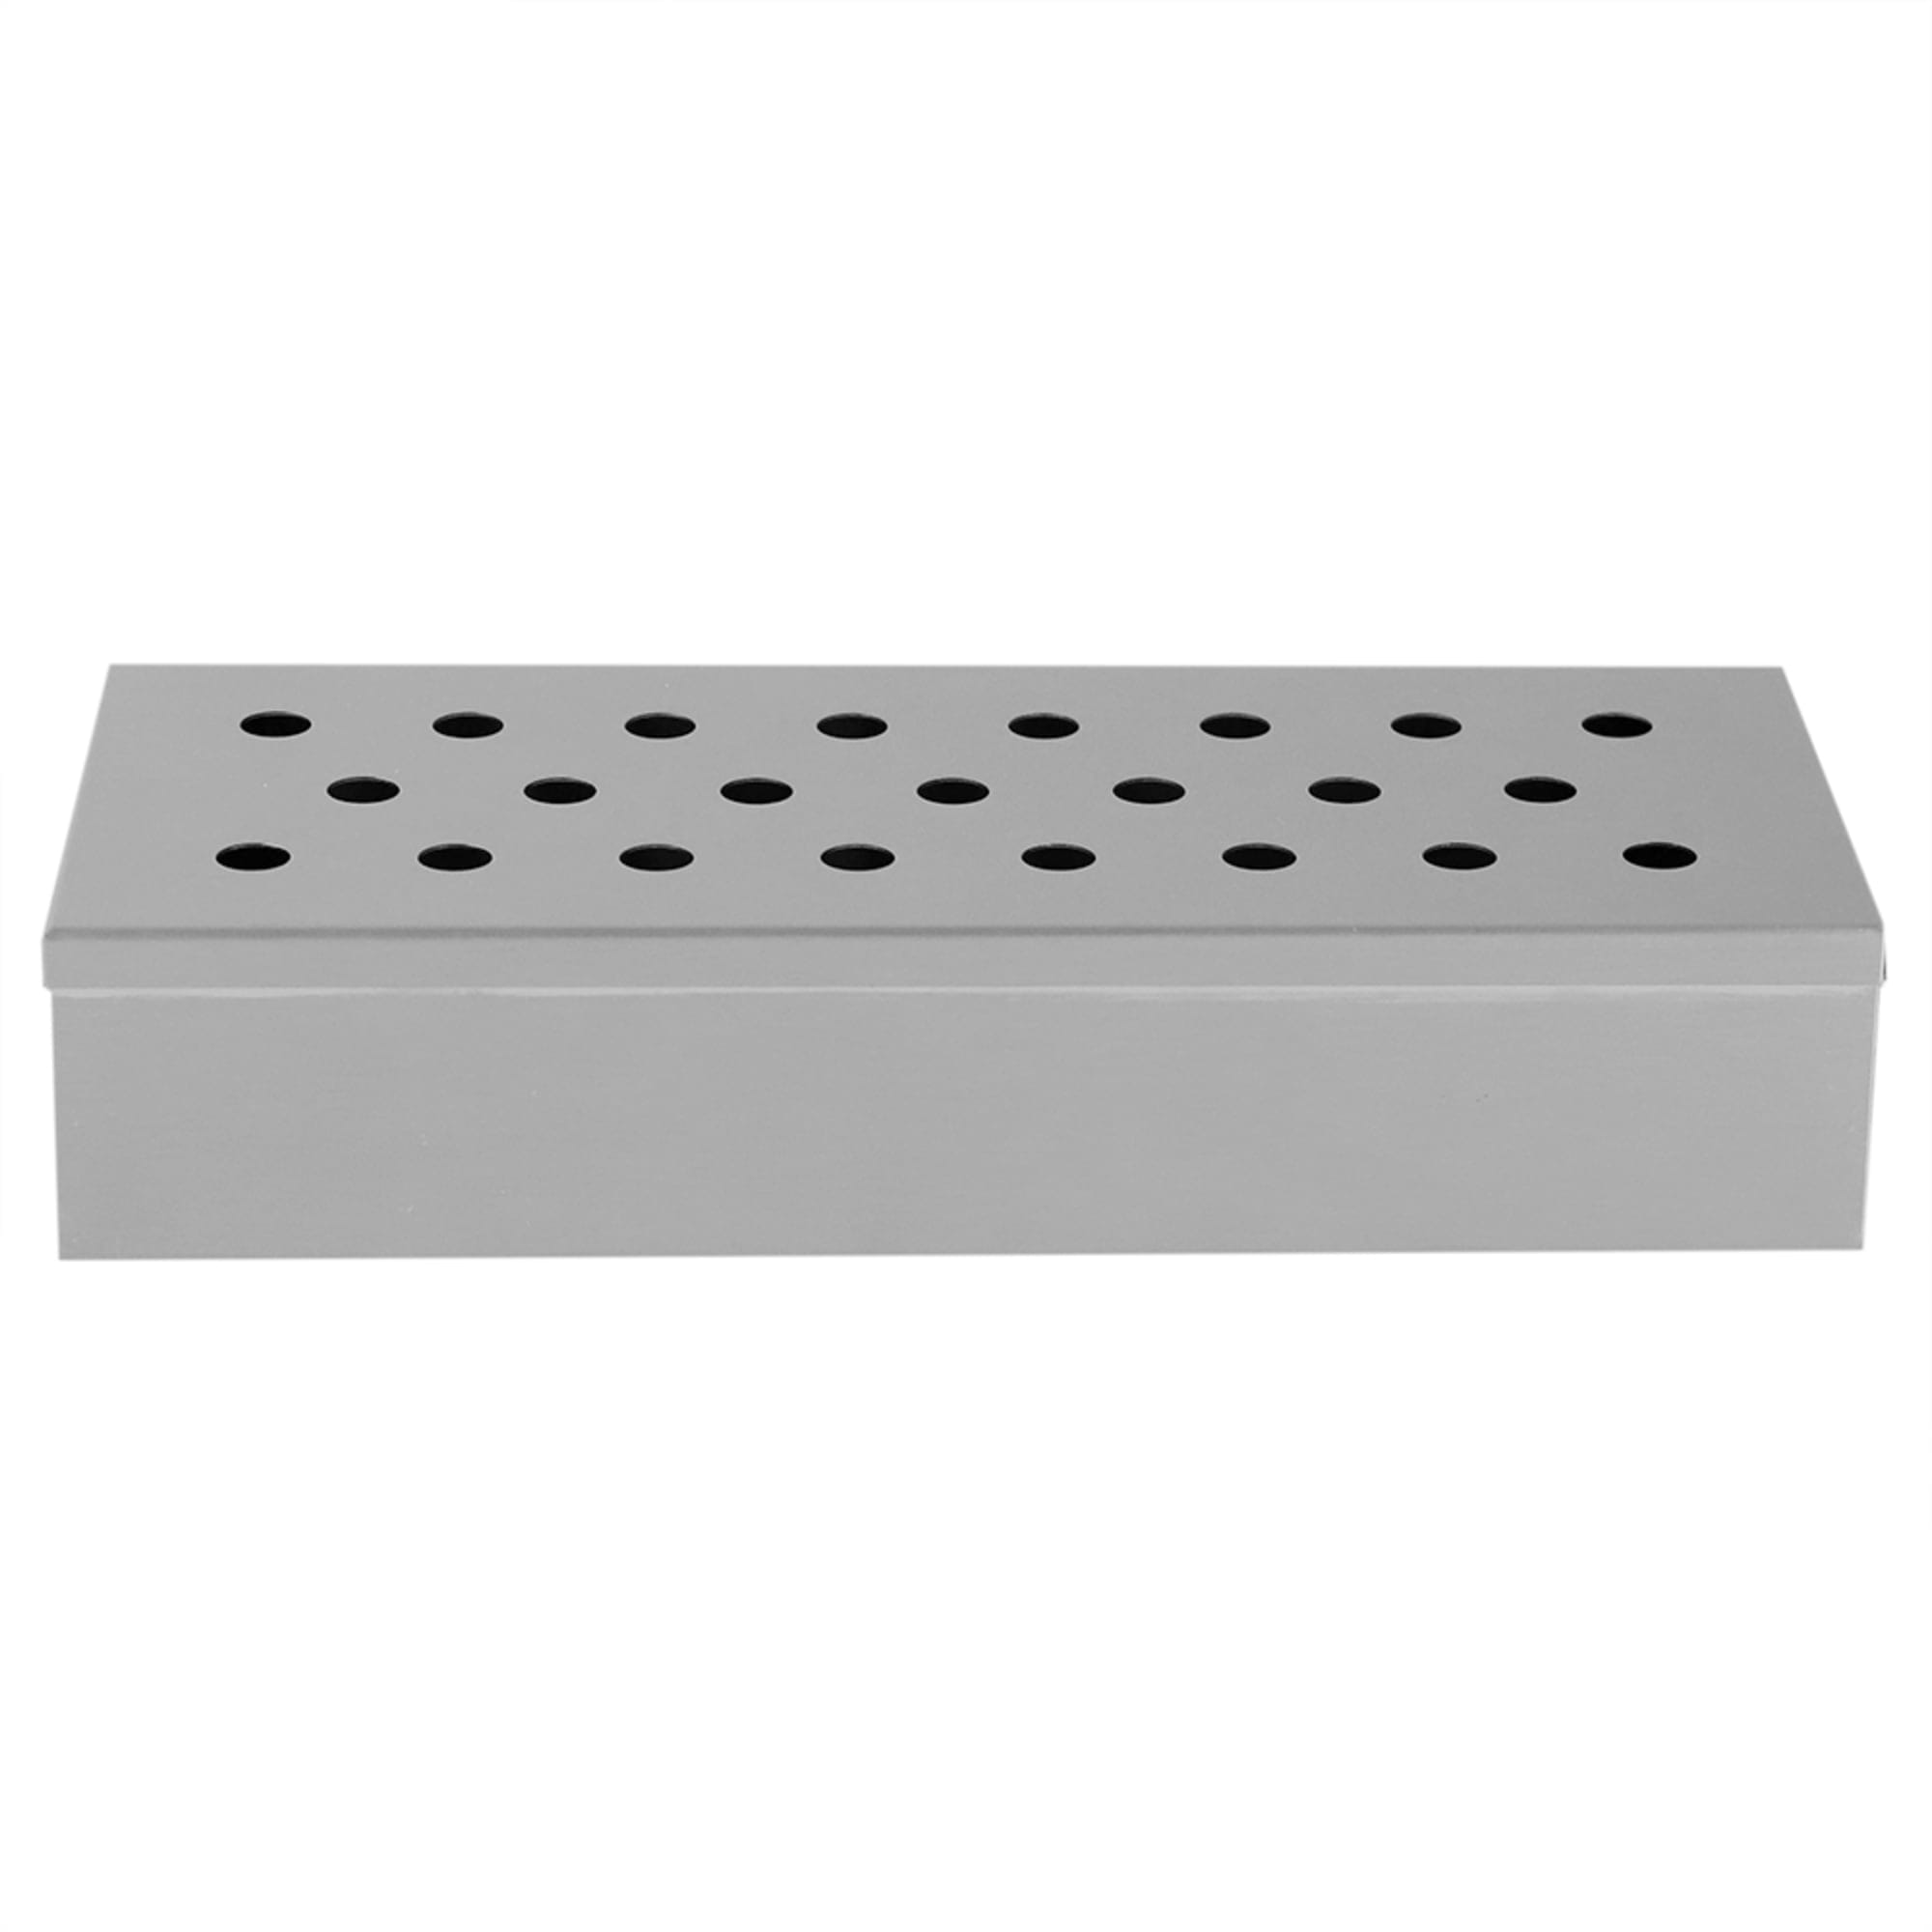 Home Basics Stainless Steel Smoke Box $2.5 EACH, CASE PACK OF 6